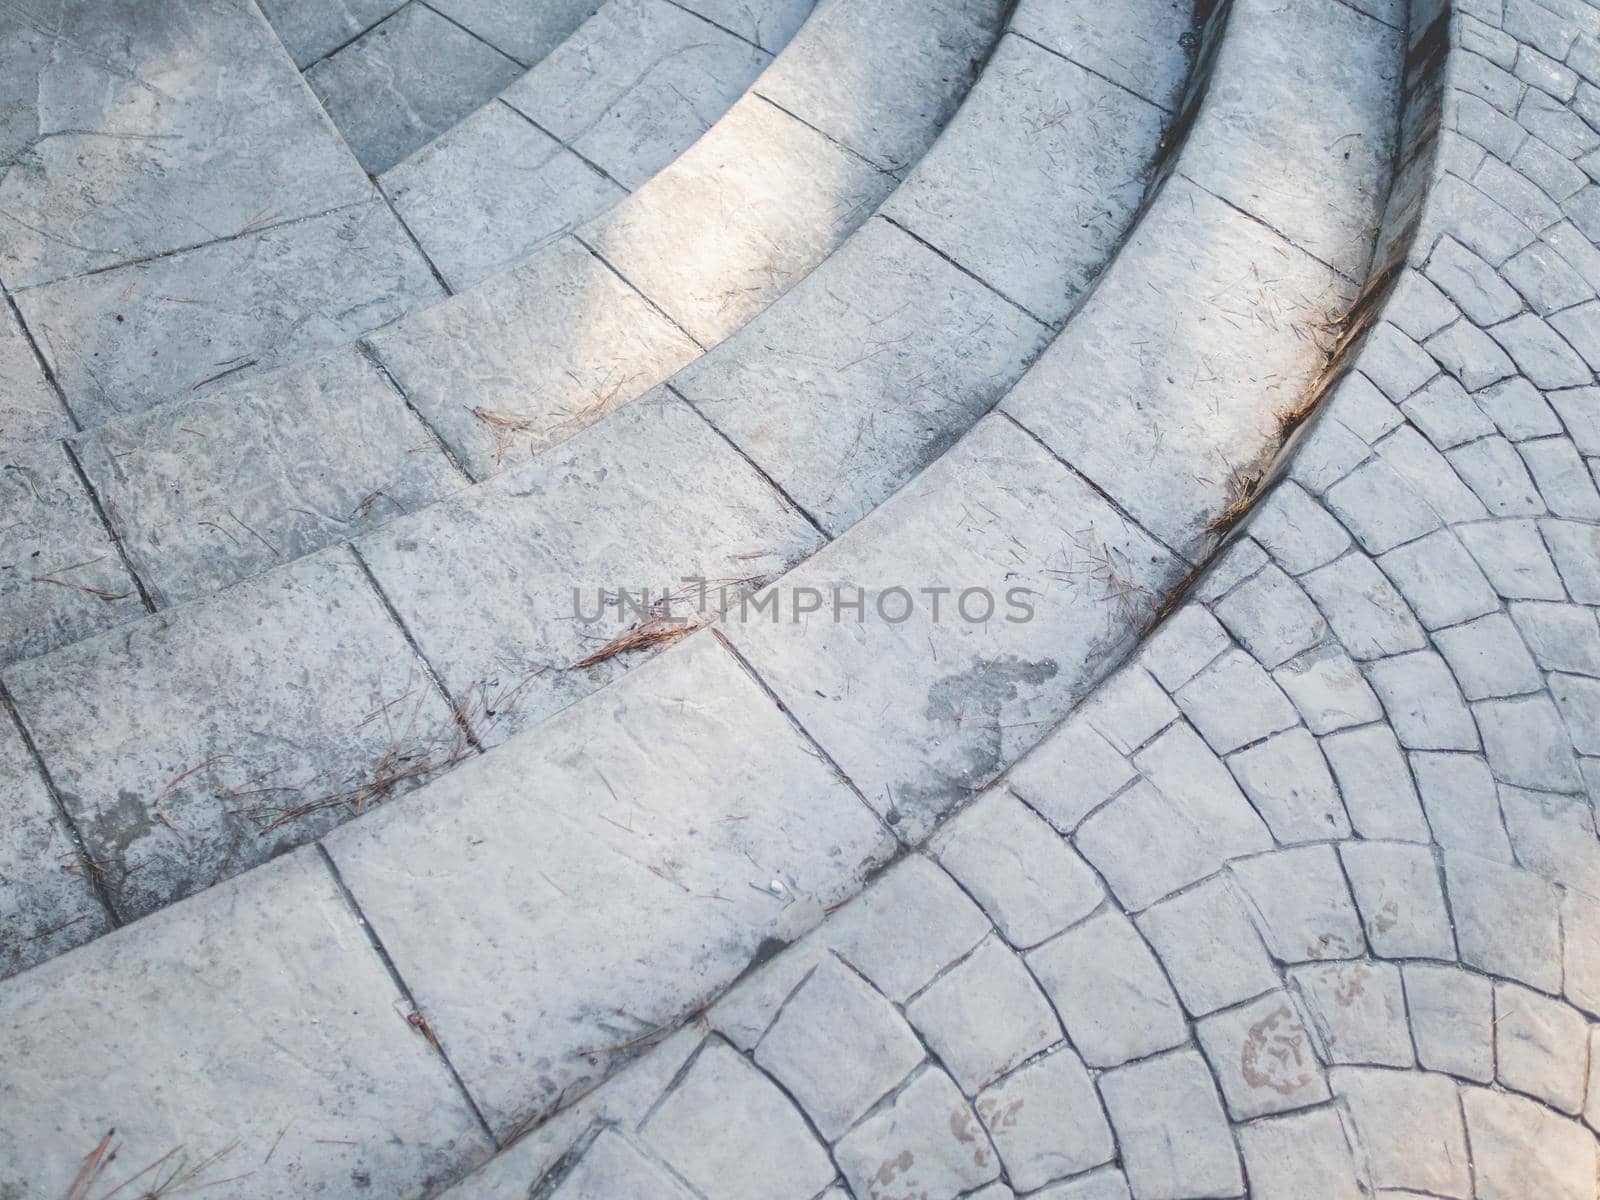 Exterior of grey tiled staircase. Sunlight and shadow on stone curved steps. Urban geometry.